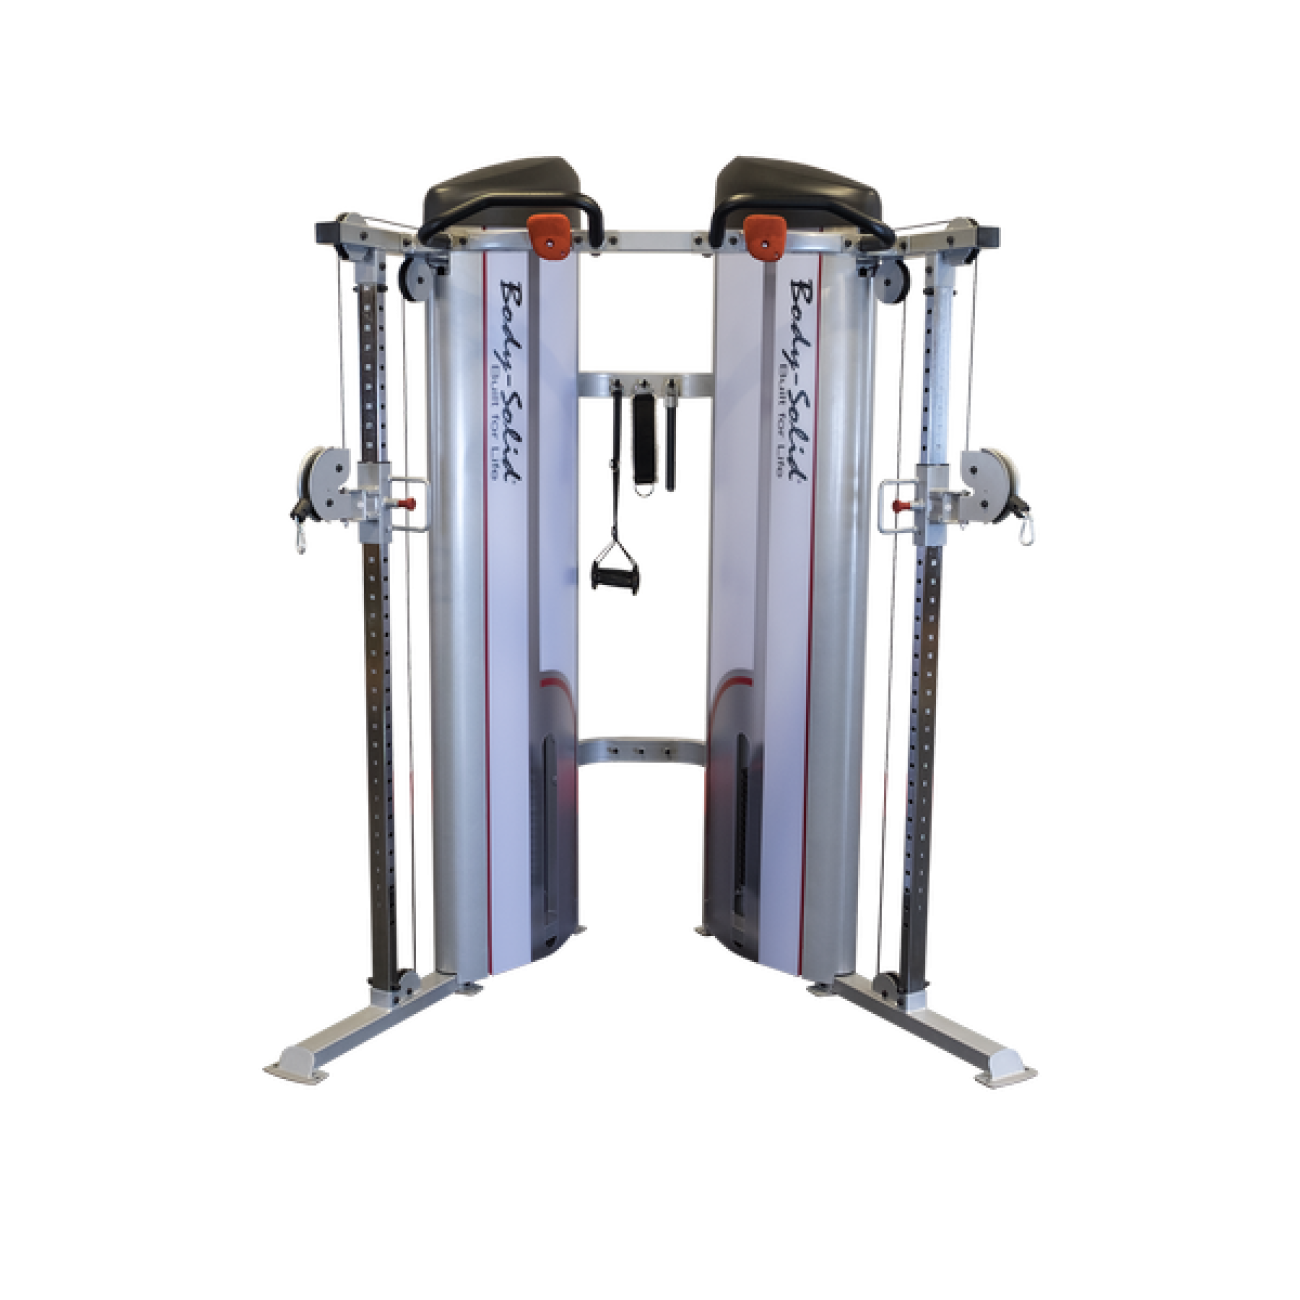 Body Solid Series 2 Functional Trainer - 160LB Stack